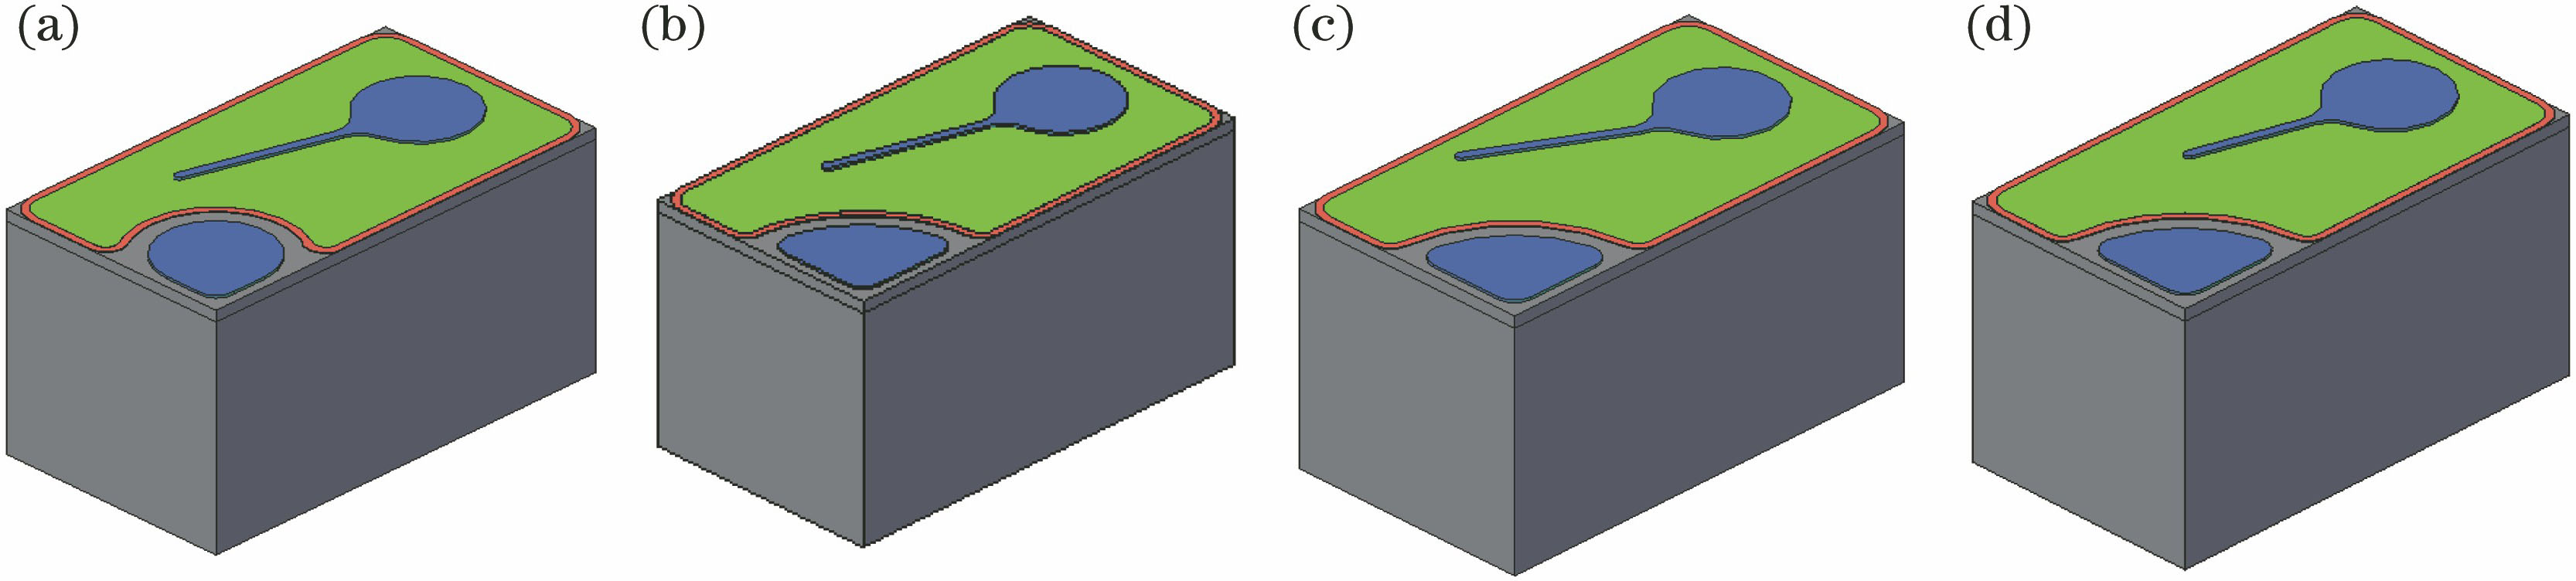 Three-dimensional diagram of LED chips with different electrode structures. (a) Primitive structure; (b) change N electrode structure; (c) change N electrode and offset P electrode structure; (d) change N electrode and shorten P electrode structure